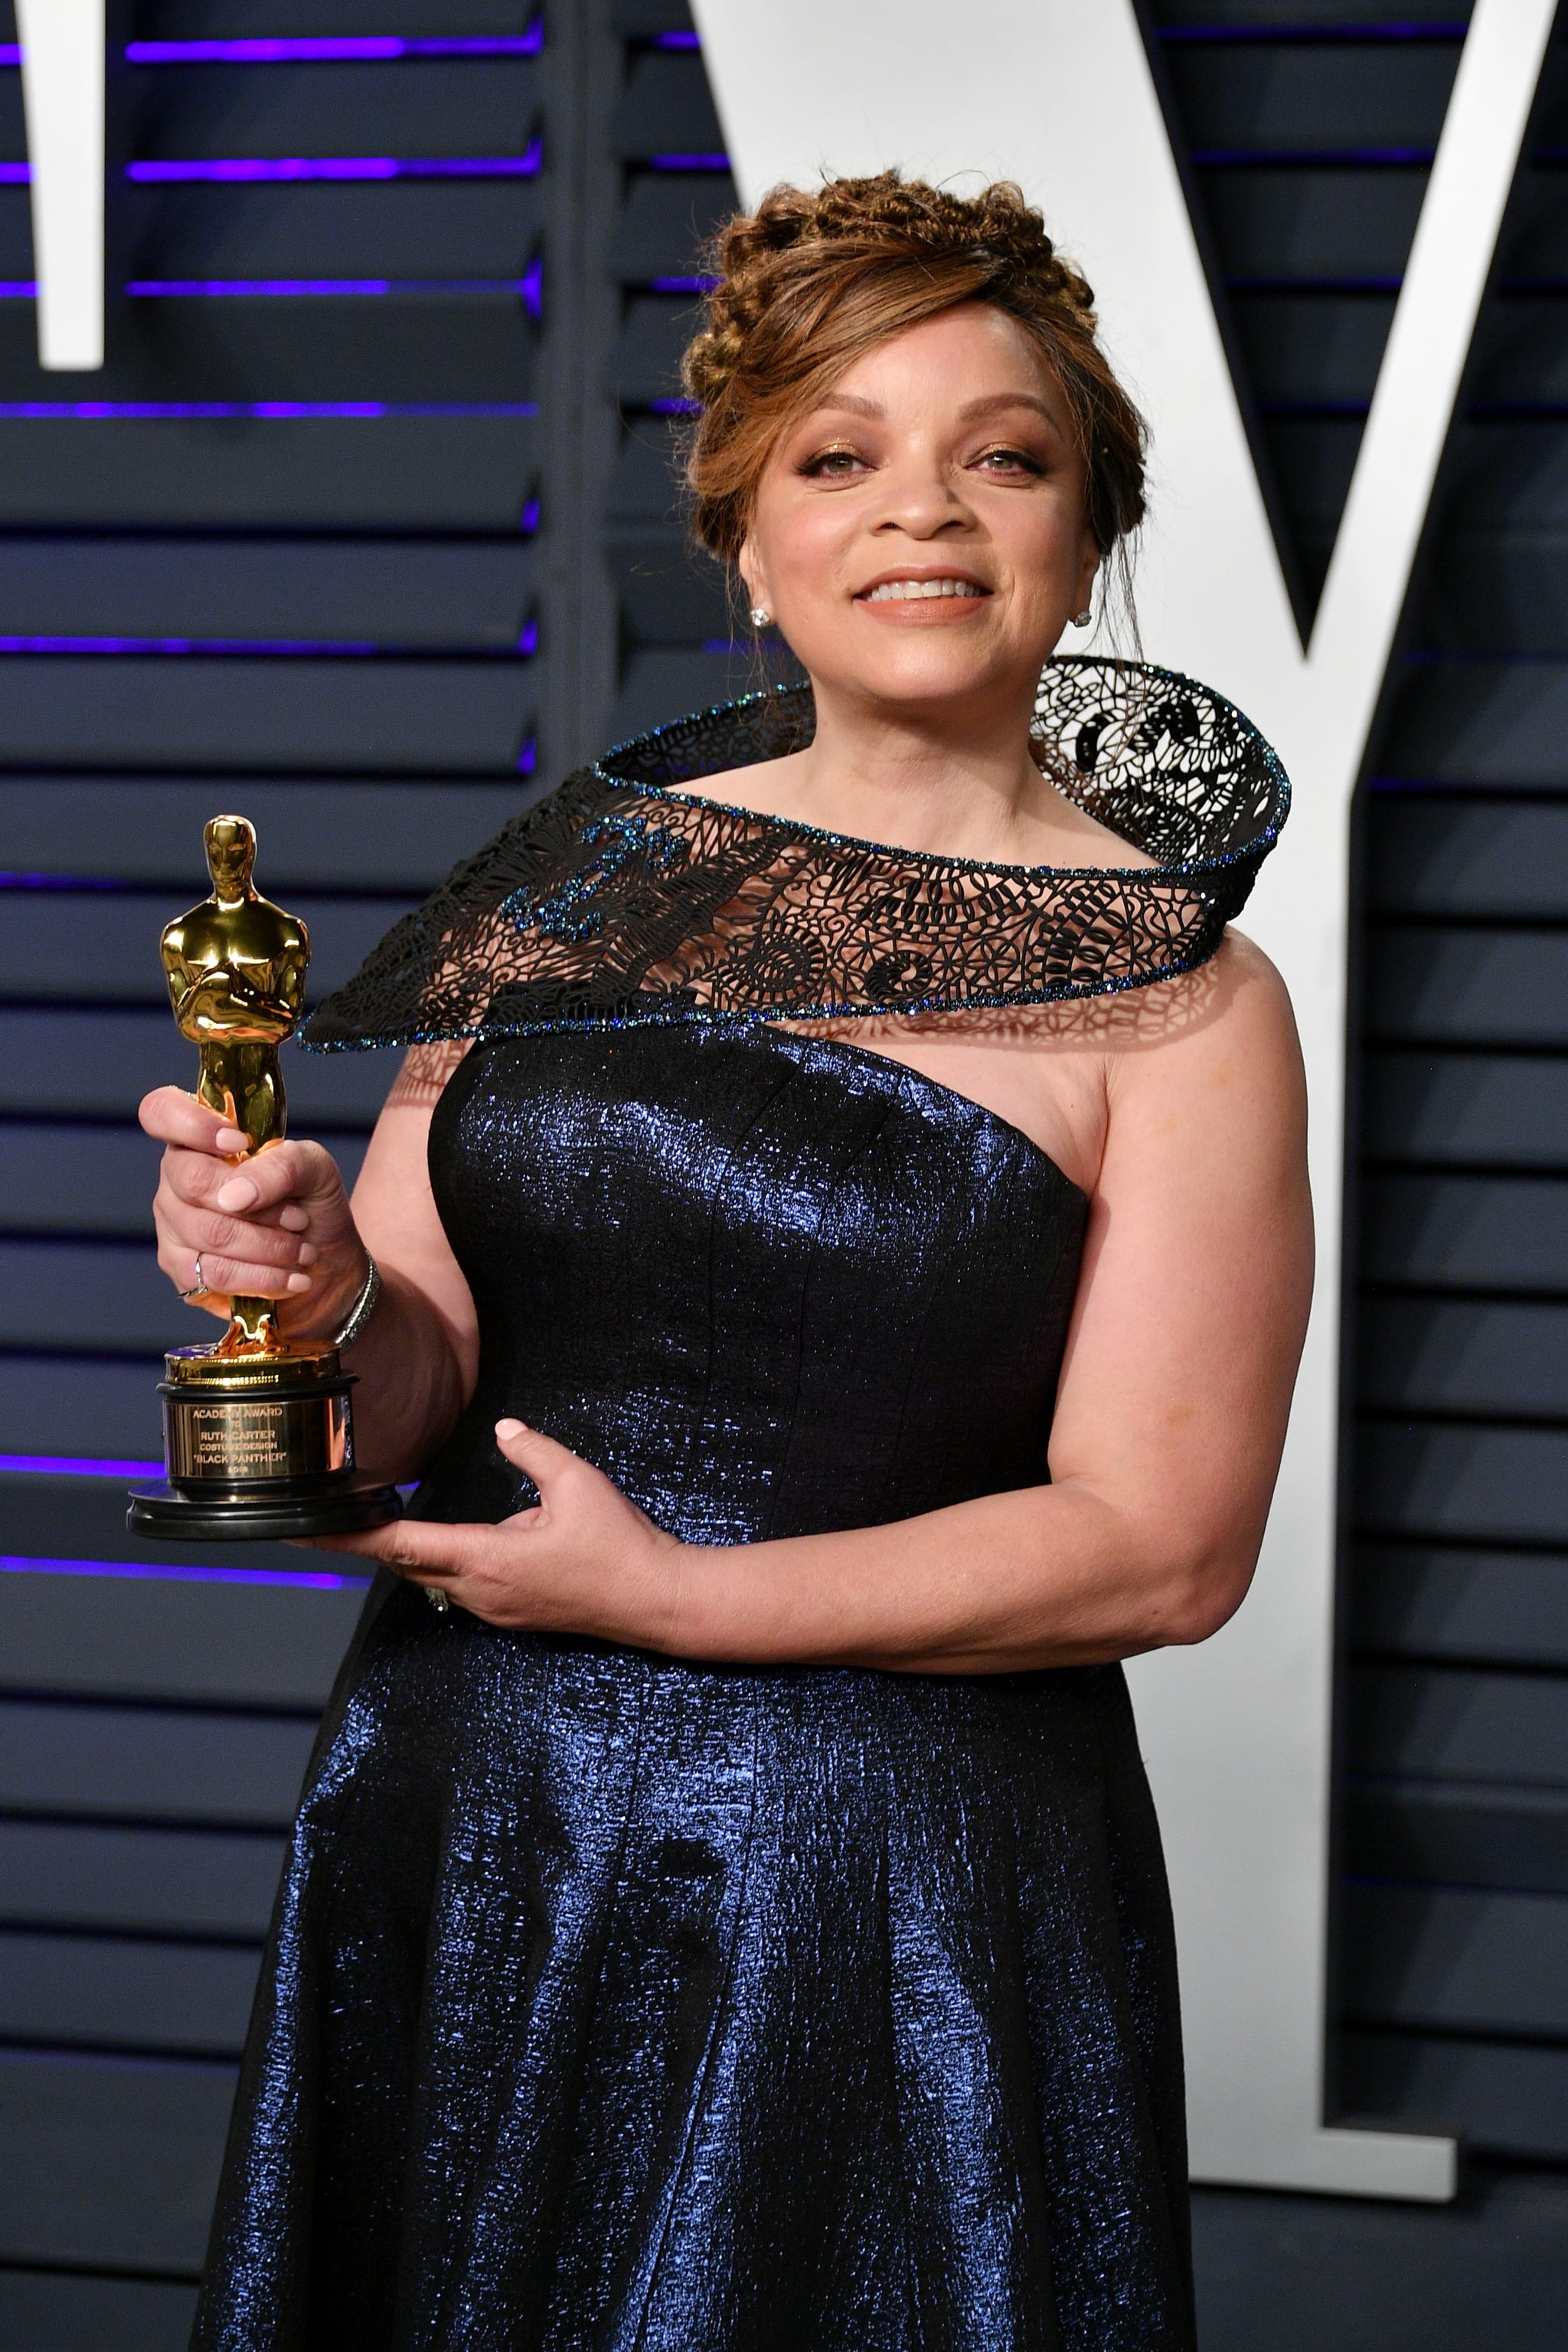 BEVERLY HILLS, CA - FEBRUARY 24:  Best Costume Design winner for 'Black Panther' Ruth E. Carter attends the 2019 Vanity Fair Oscar Party hosted by Radhika Jones at Wallis Annenberg Center for the Performing Arts on February 24, 2019 in Beverly Hills, California.  (Photo by Dia Dipasupil/Getty Images)